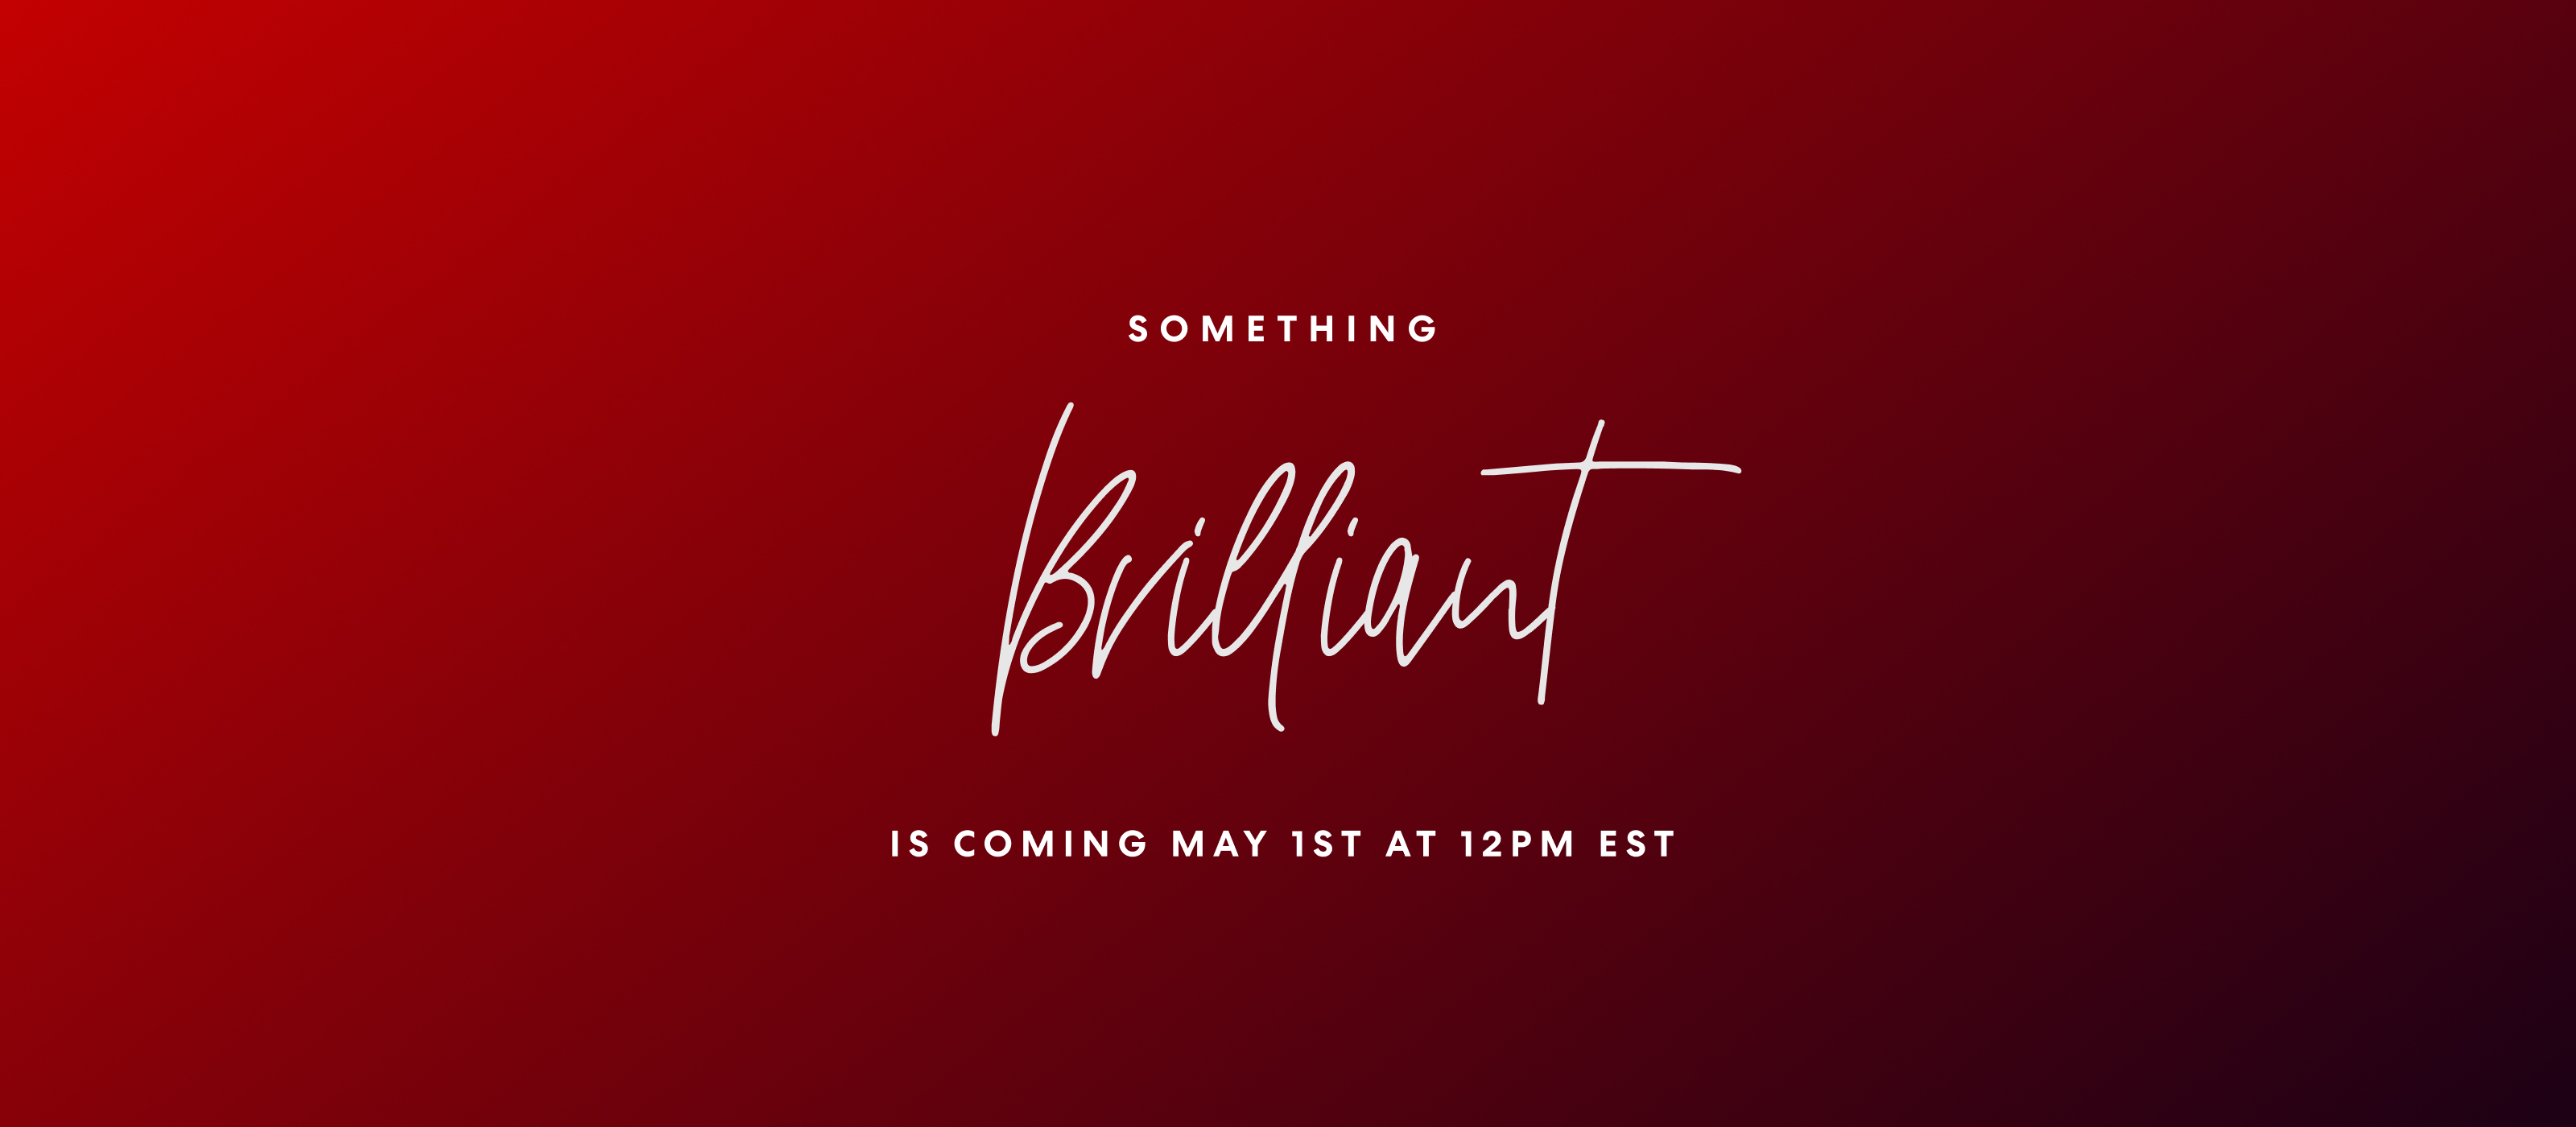 Something Brilliant is coming